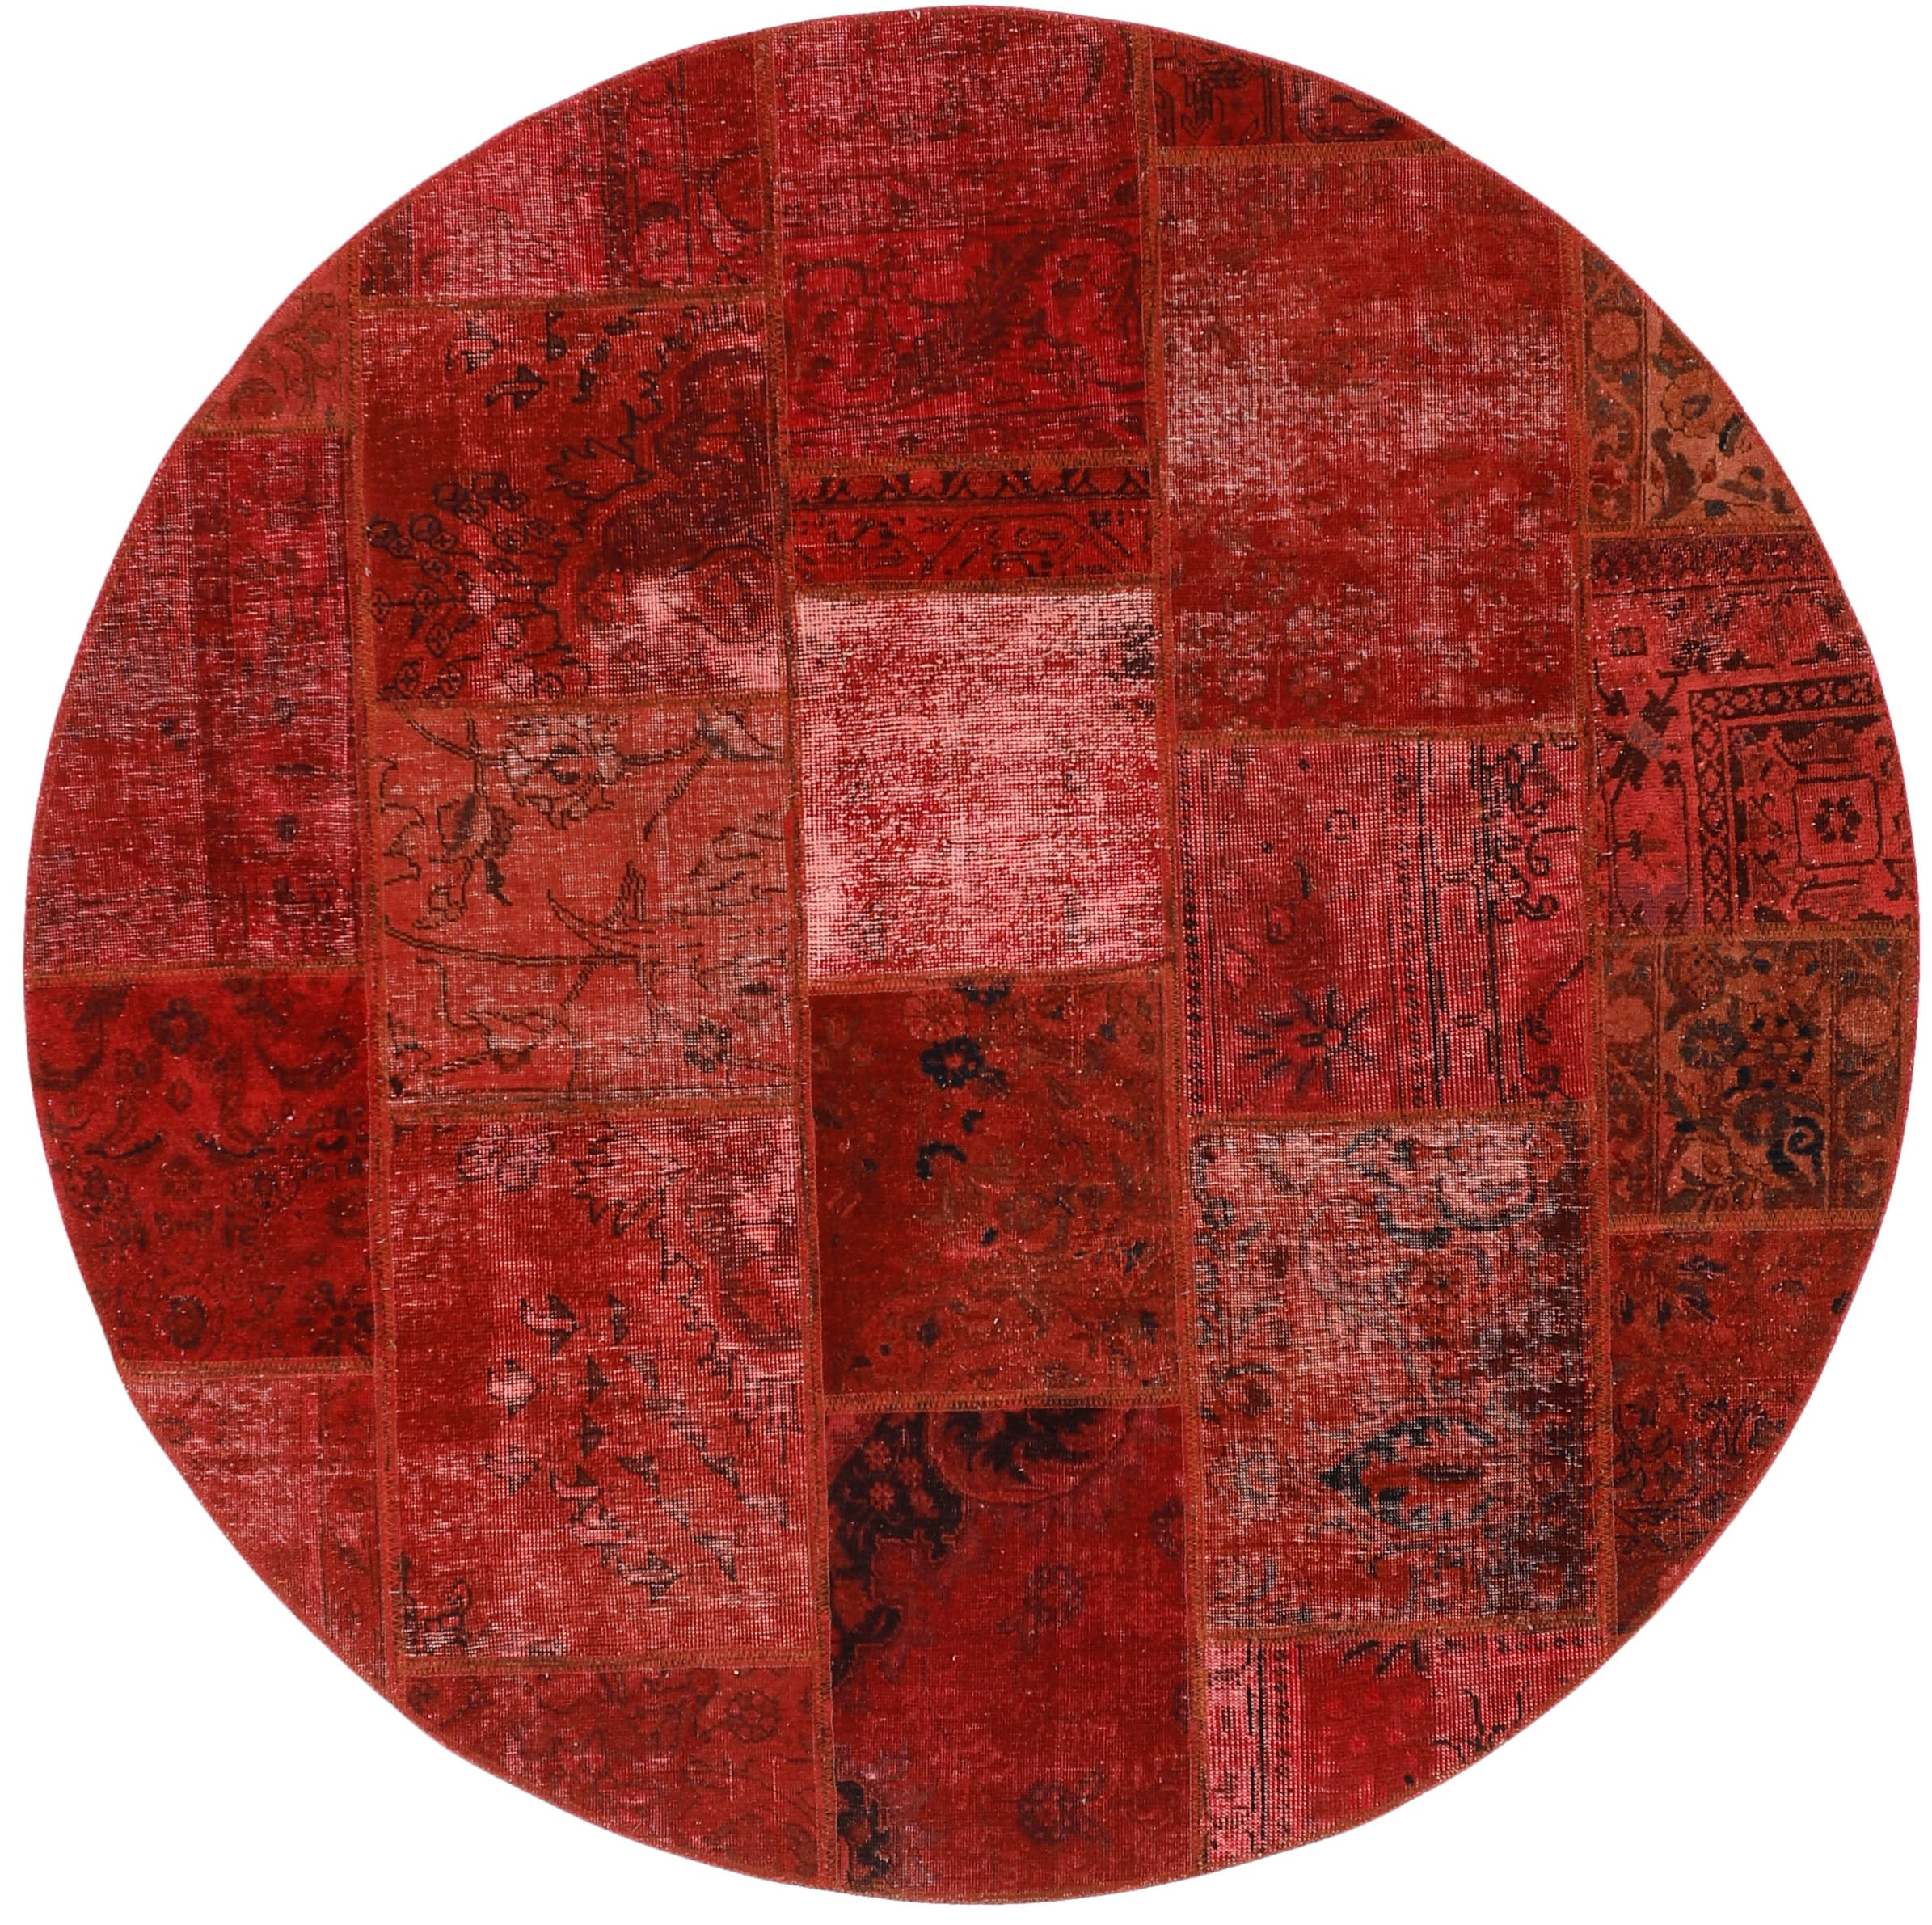 Authentic red patchwork persian circle rug